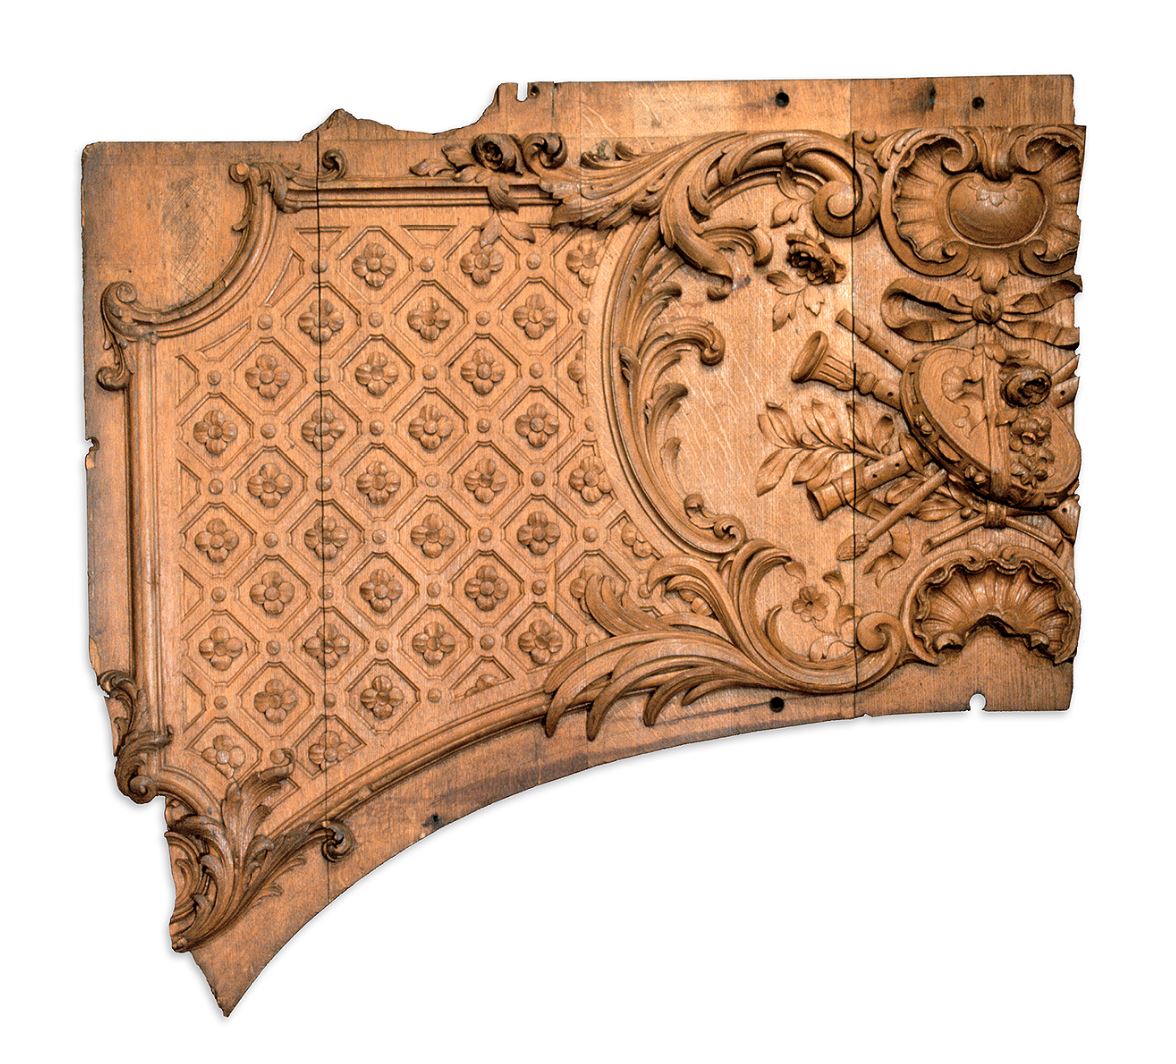 This hand carved wood lounge panel fragment comes from the arch over the forward entrance to the First Class lounge, the area where RMS #Titanic broke in half before plunging to the ocean floor, hence the broken edges. @ns_mma M2004.50.108